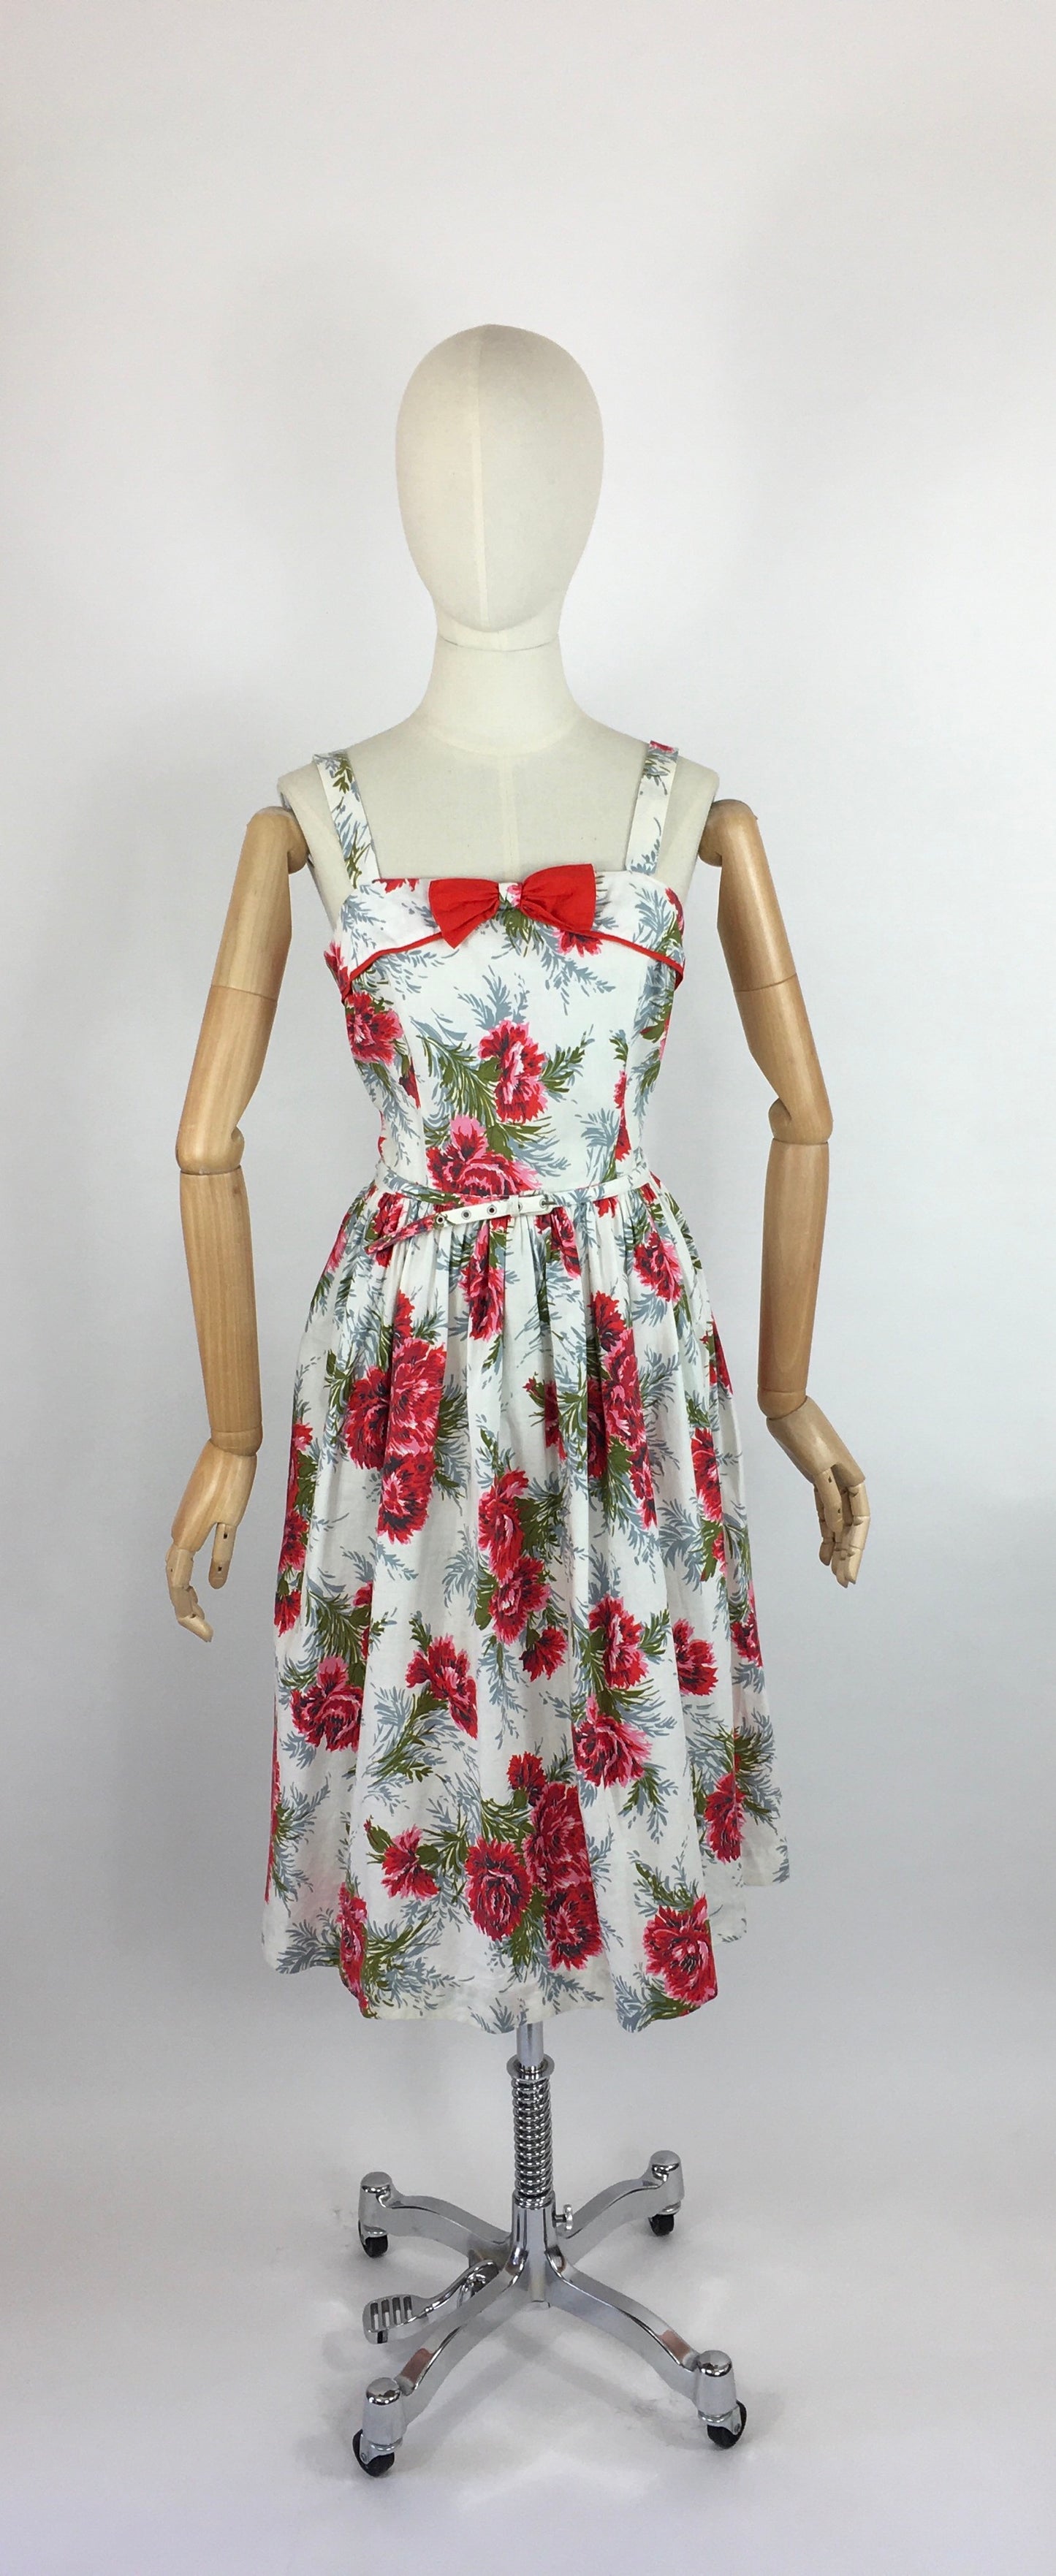 Original 1950s Floral Sun Dress with Contrast Bow and Piping - Beautiful Carnation Print Cotton in Bright Reds, Corals and Greens